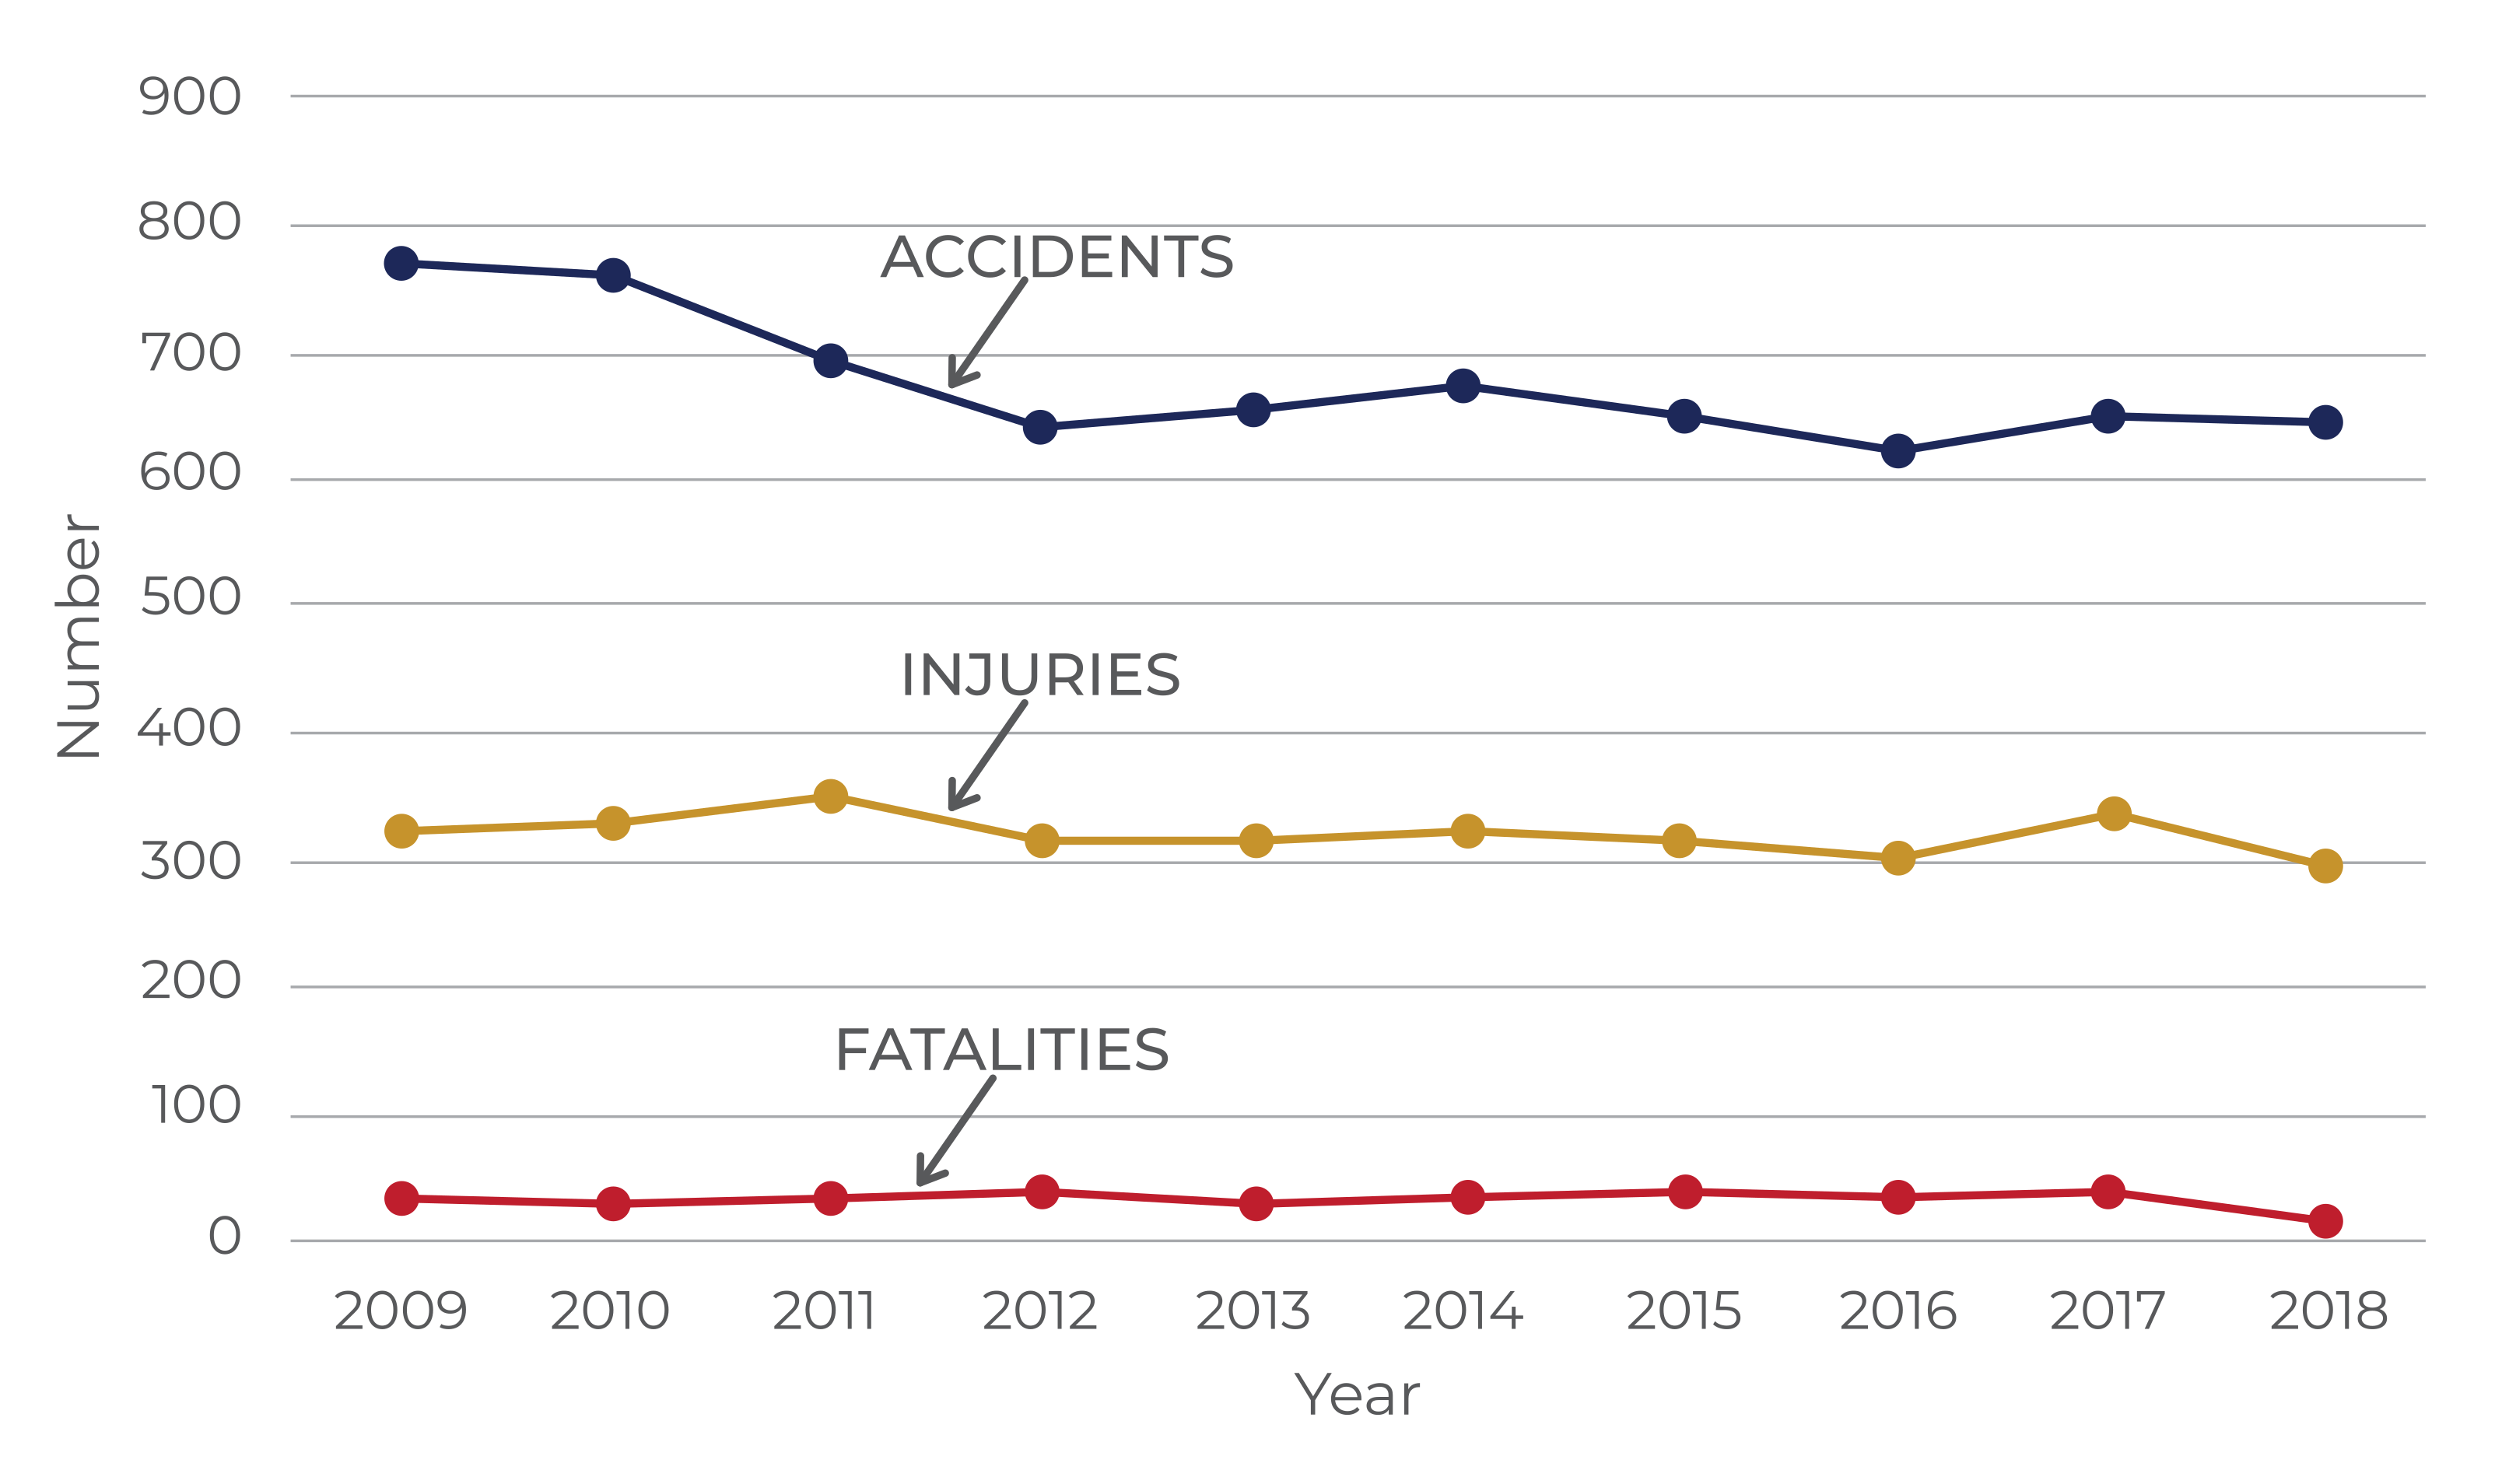 Figure 10 is a line chart that illustrates rail accidents, fatalities, and injuries in Pennsylvania from 2009 through 2018, with accidents, injuries, and fatalities illustrated as separate lines.